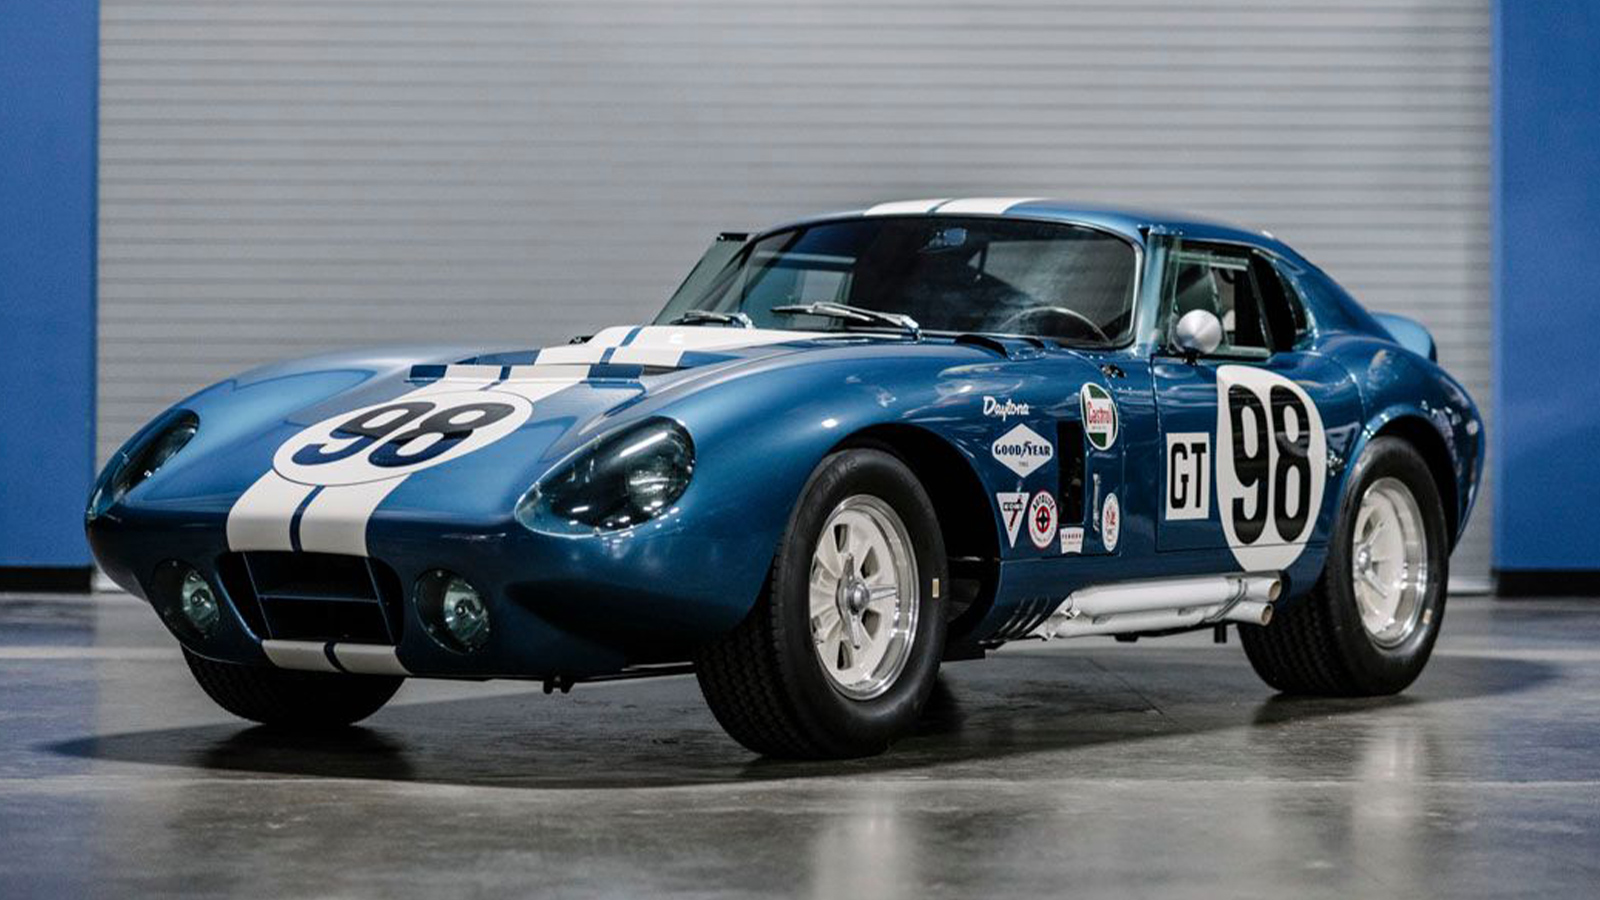 1964 Shelby Cobra Daytona Coupe Continuation Is A Rolling Time Capsule Of  Era-Correct Parts - IMBOLDN